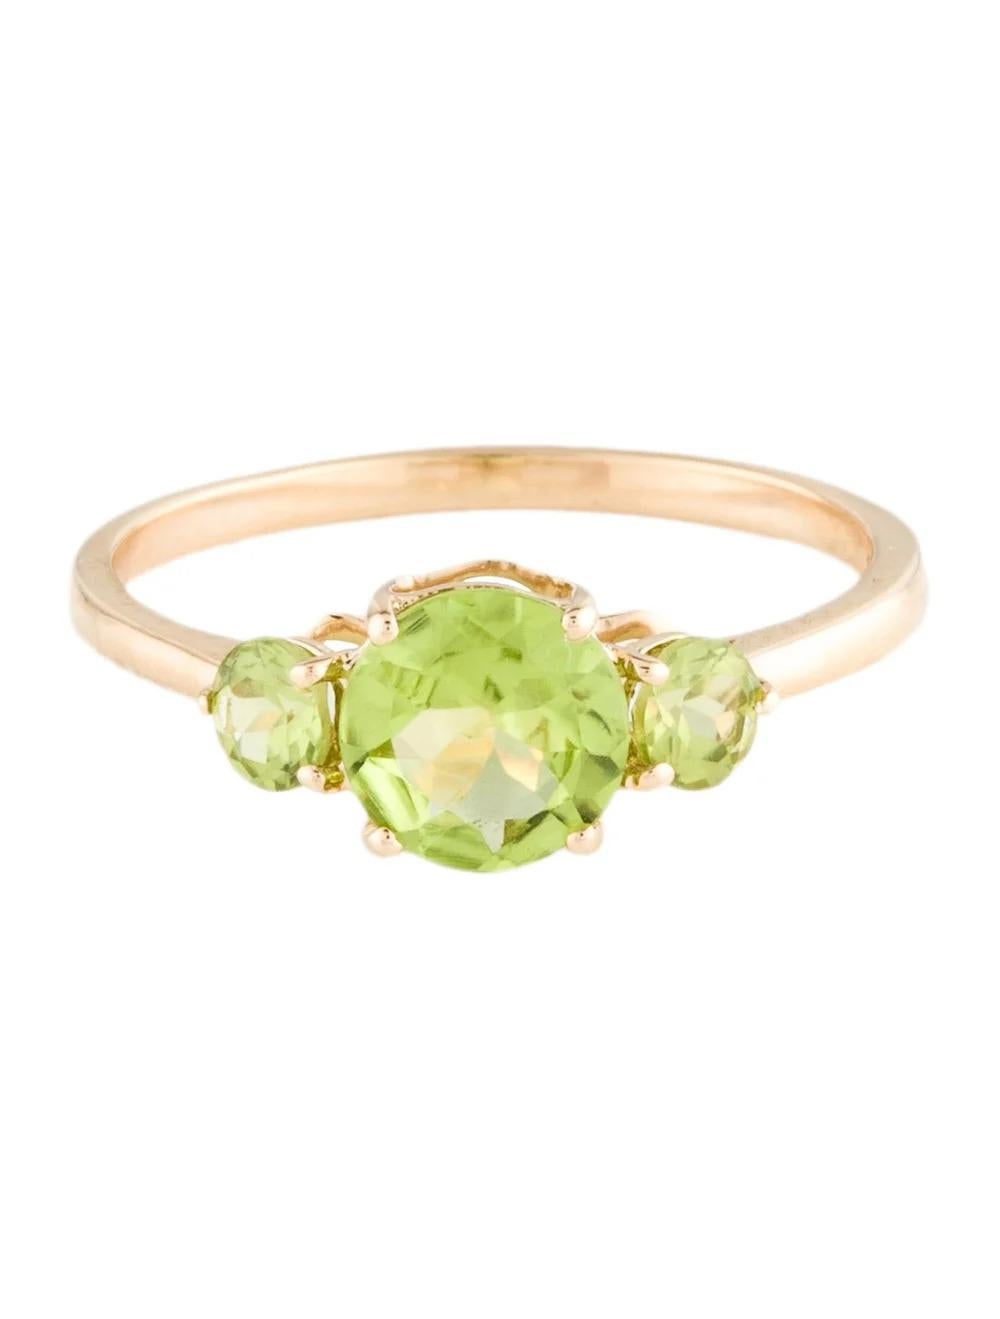 Round Cut 14K Peridot Cocktail Ring Size 6.75: Vibrant Green Gemstone, Elegant Yellow Gold For Sale